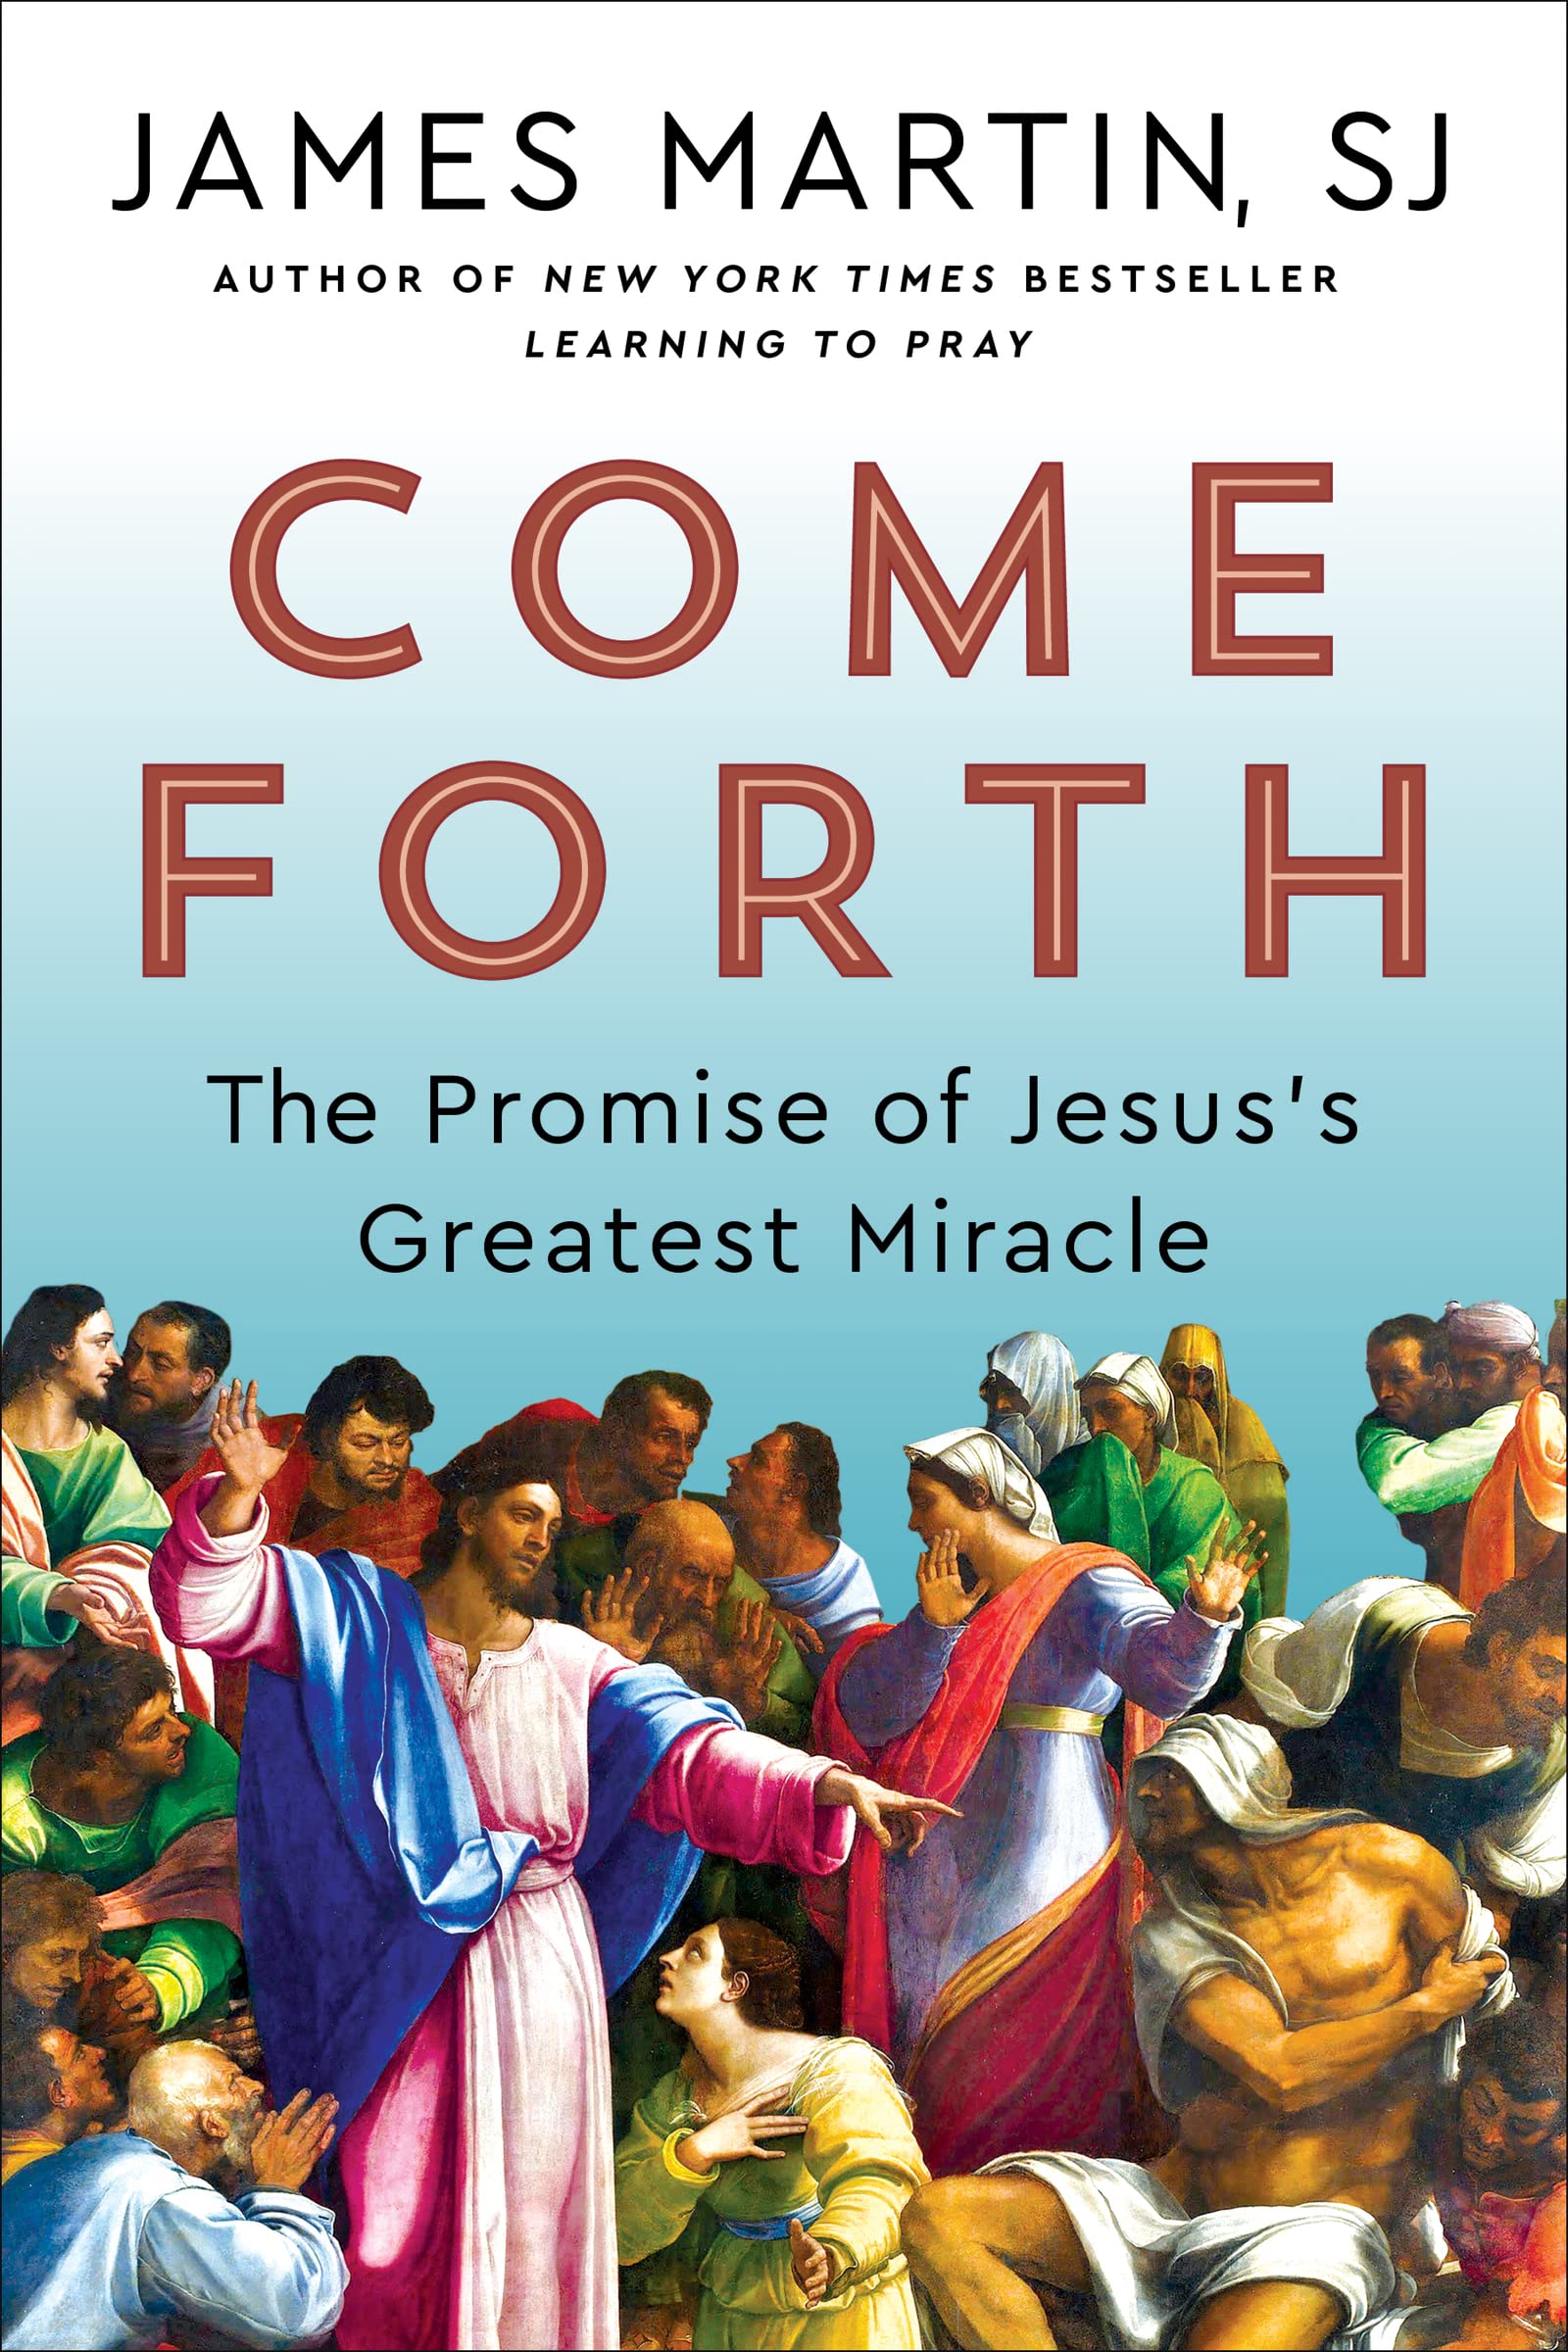 Come Forth: The Promise of Jesus's Greatest Miracle by Martin, James